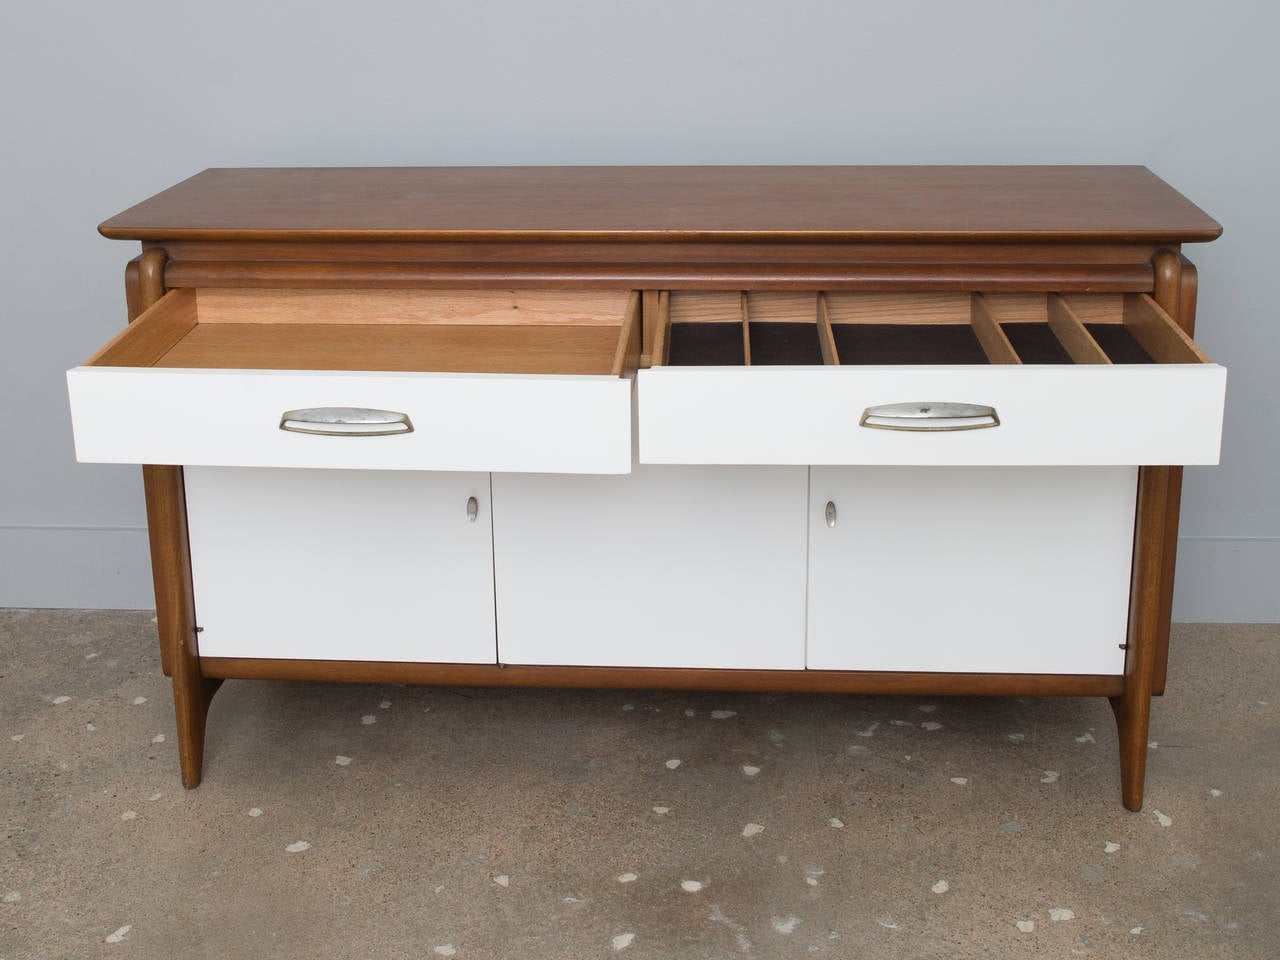 Quality vintage American-made 2-drawer 3-door credenza with dovetailed drawers.  Made by Drexel and part of their Projection Collection.  Perfect for a small dining area, hallway, kid's room or family room as an entertainment unit.